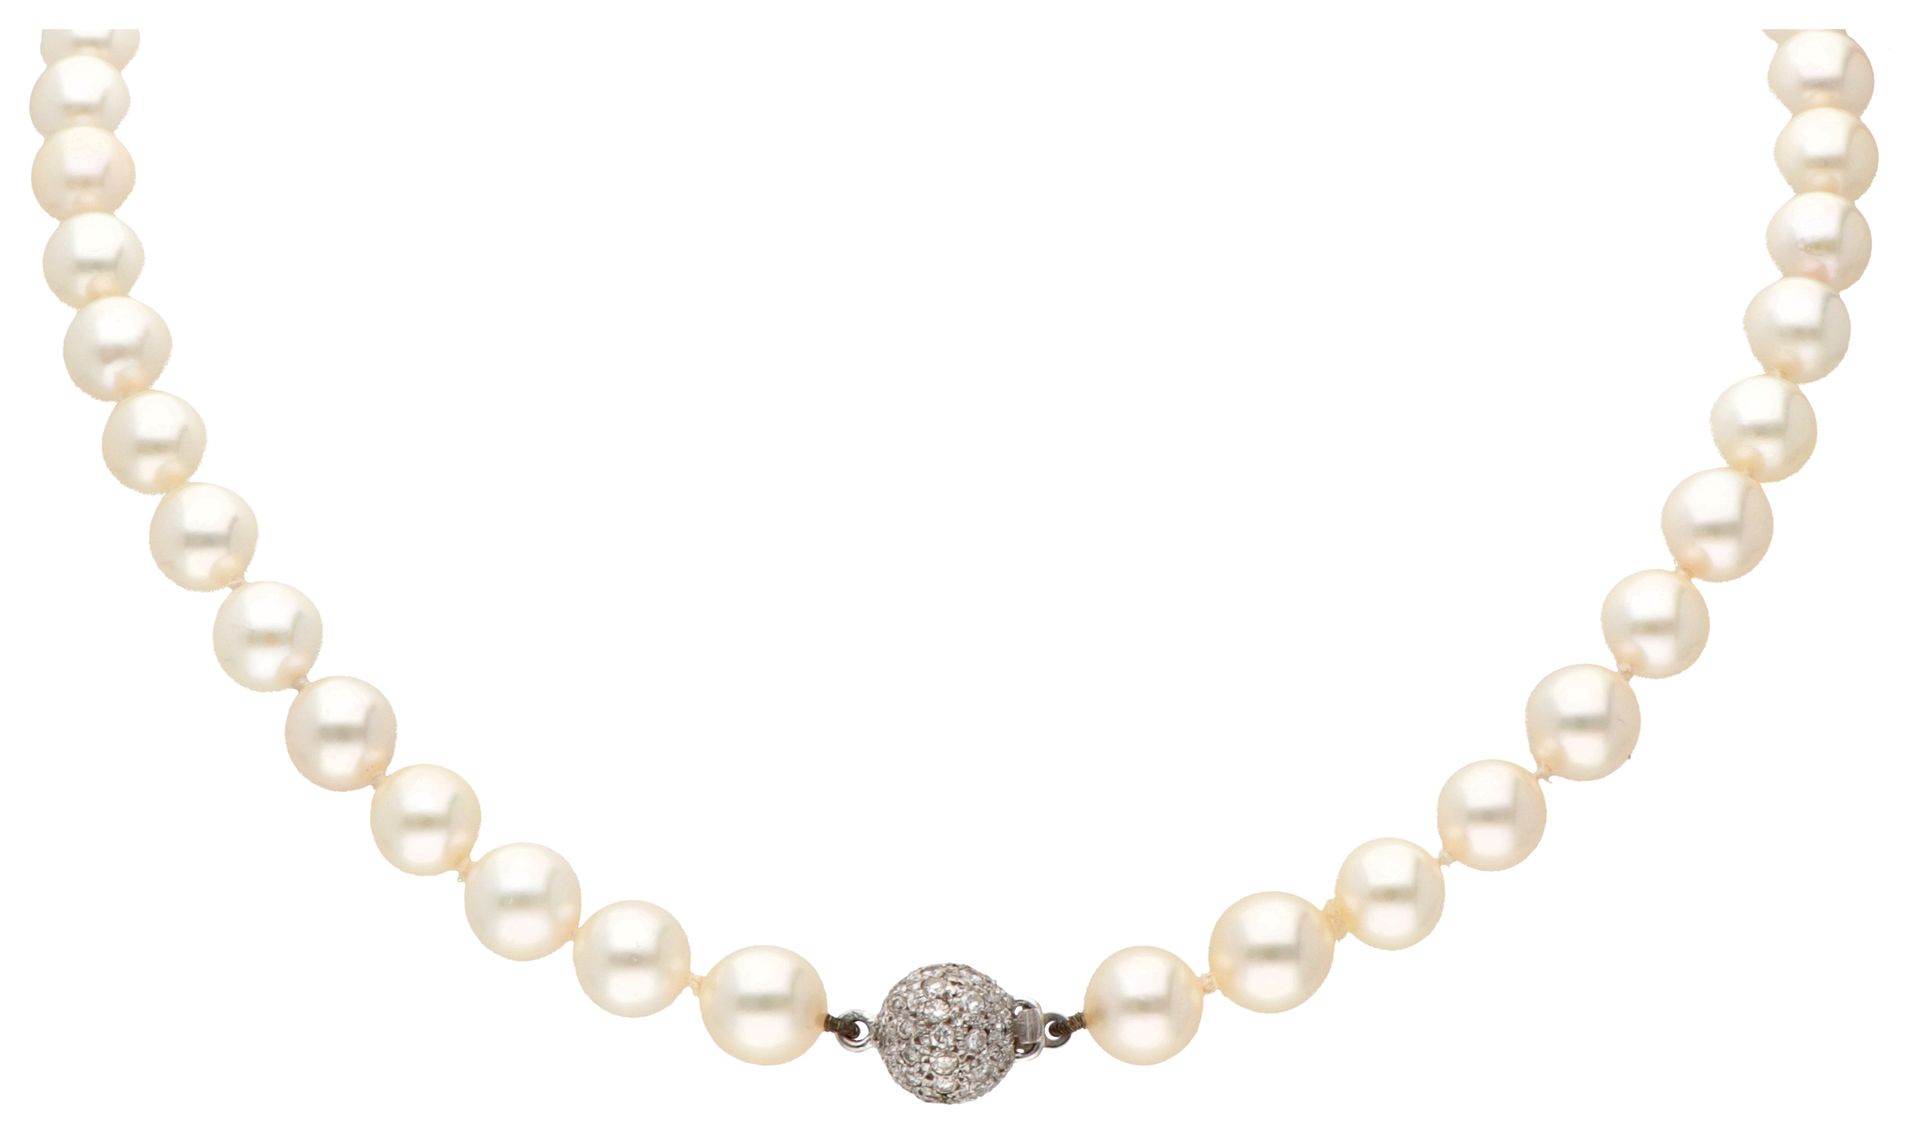 Saltwater pearl necklace with a 14K. White gold closure set with diamond. Hallma&hellip;